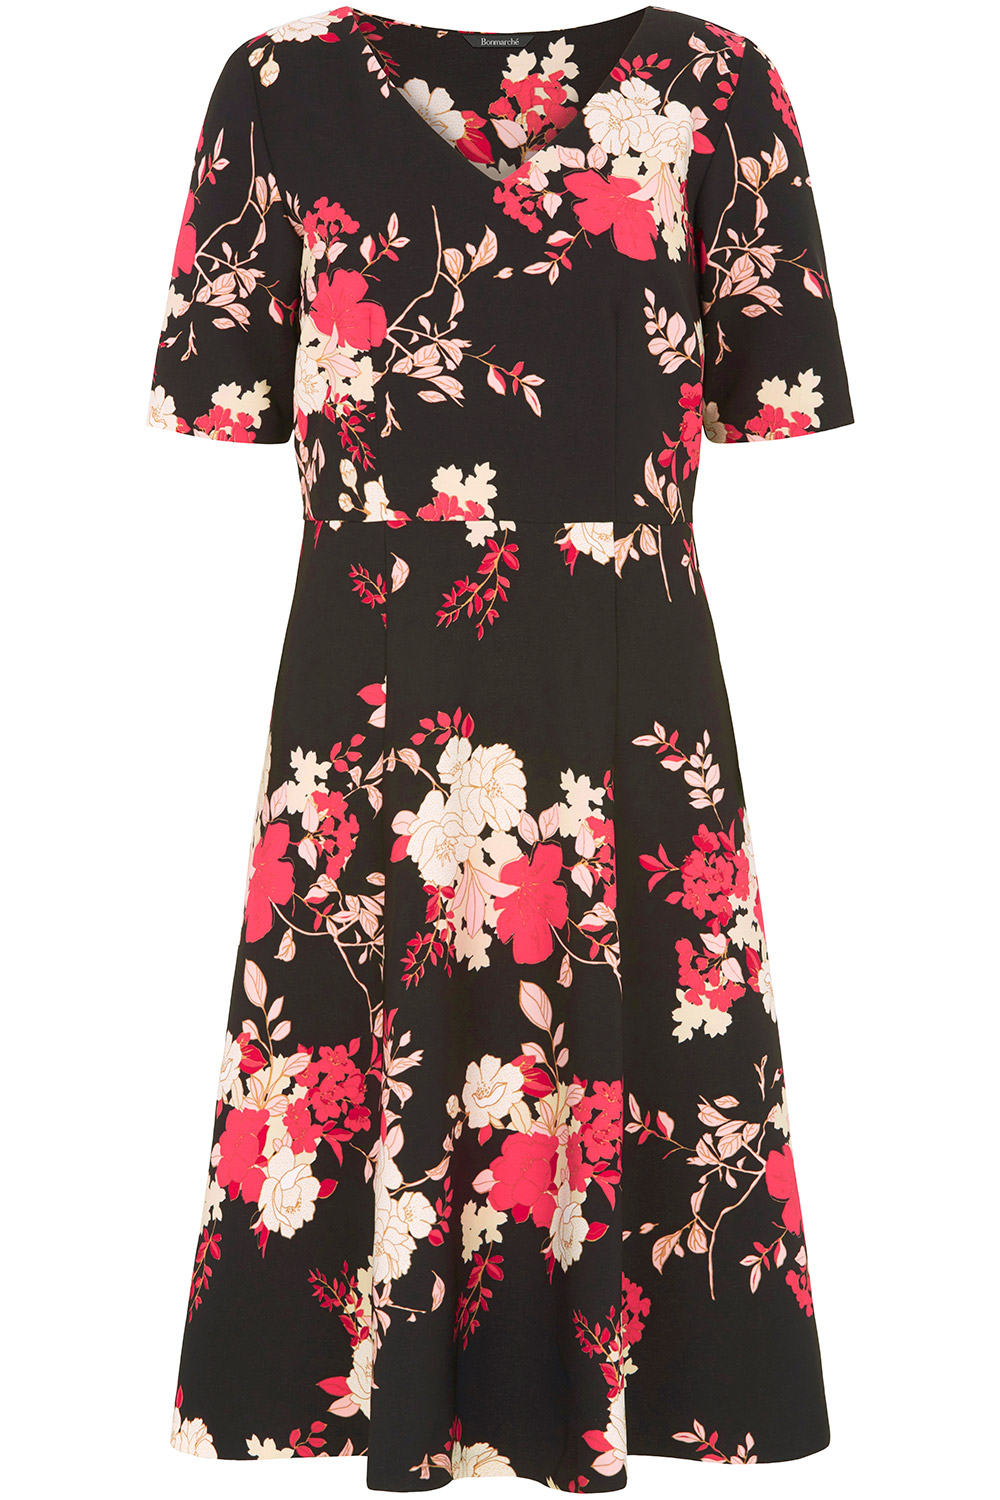 Buy Printed Fit and Flare Dress | Home Delivery | Bonmarché